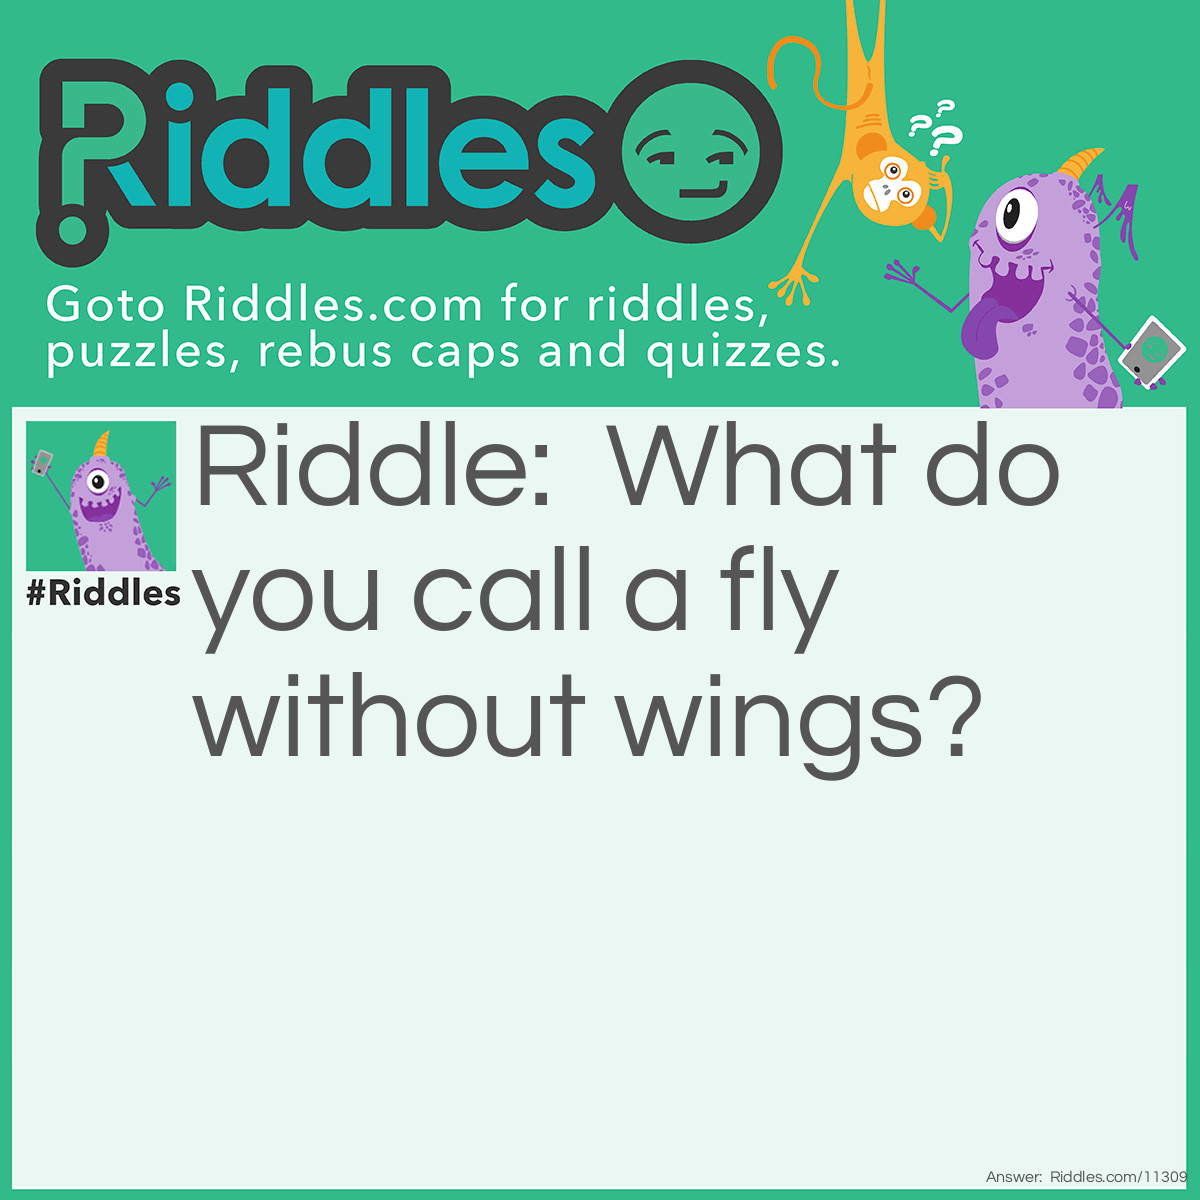 Riddle: What do you call a fly without wings? Answer: A walk.  Another popular answer: A Zipper.